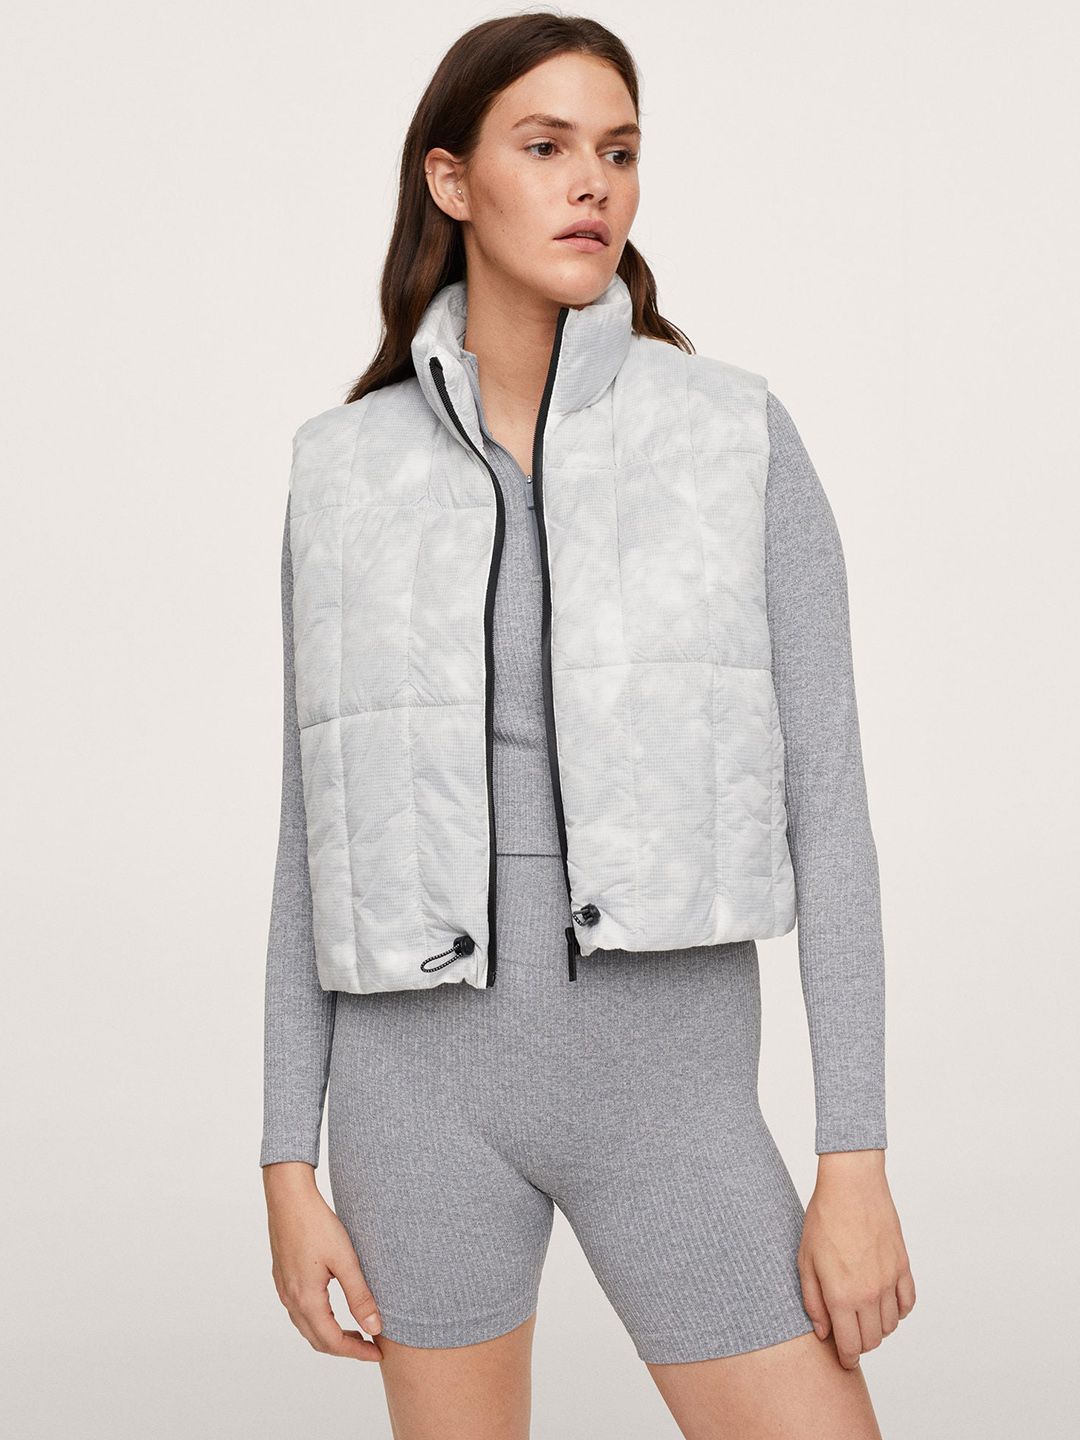 MANGO Women Grey Solid Padded Jacket Price in India